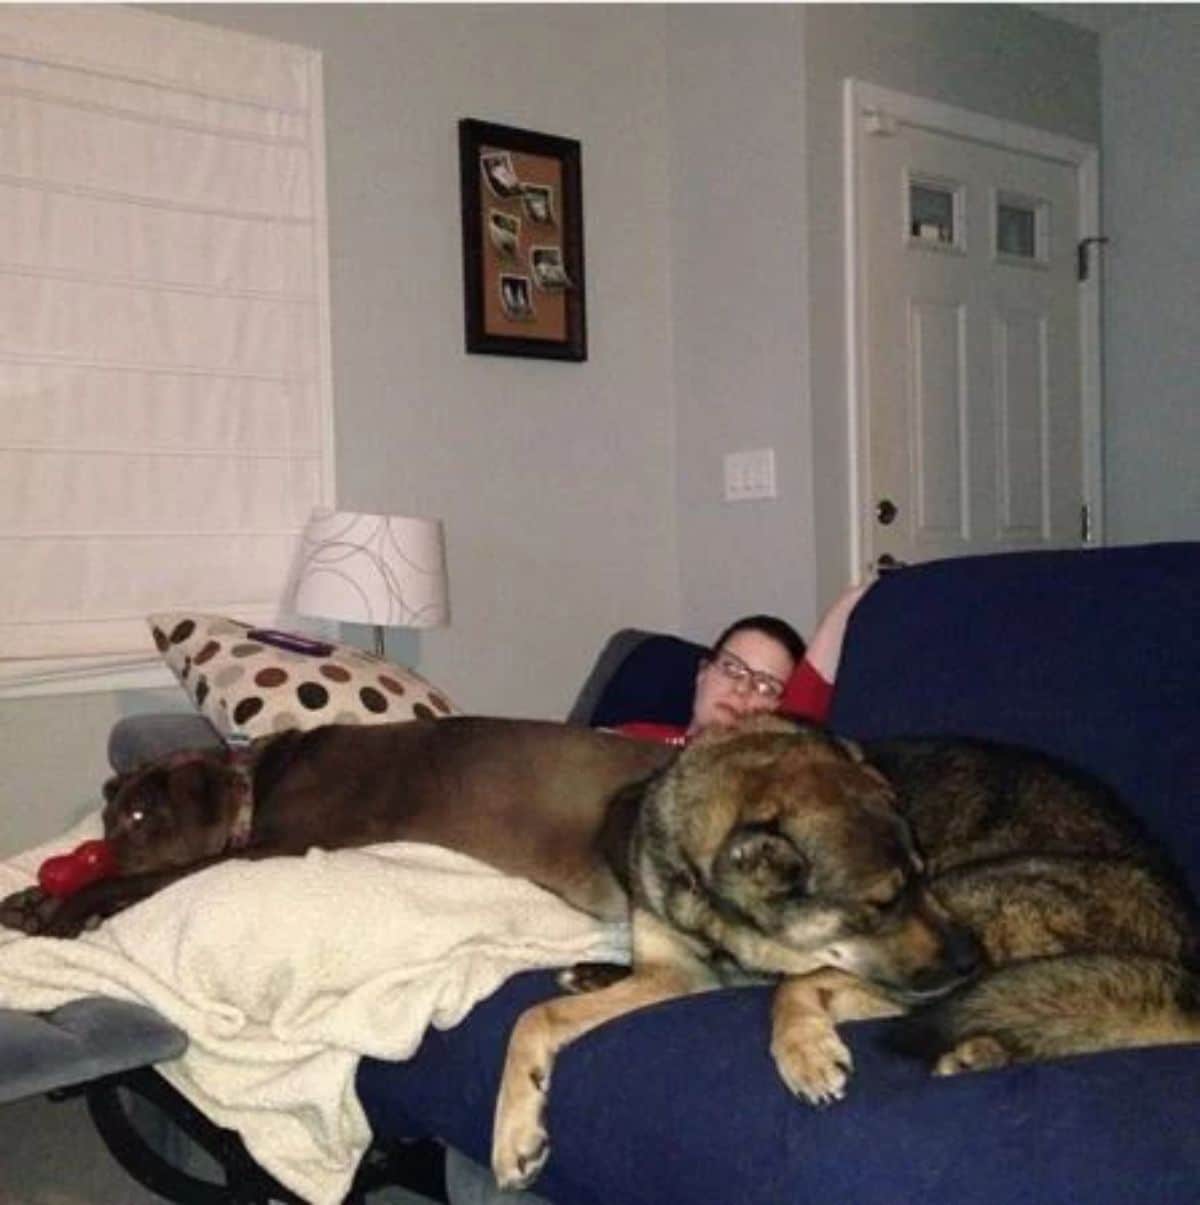 large brown dog and large black brown and white dog laying on a sleeping person's lap